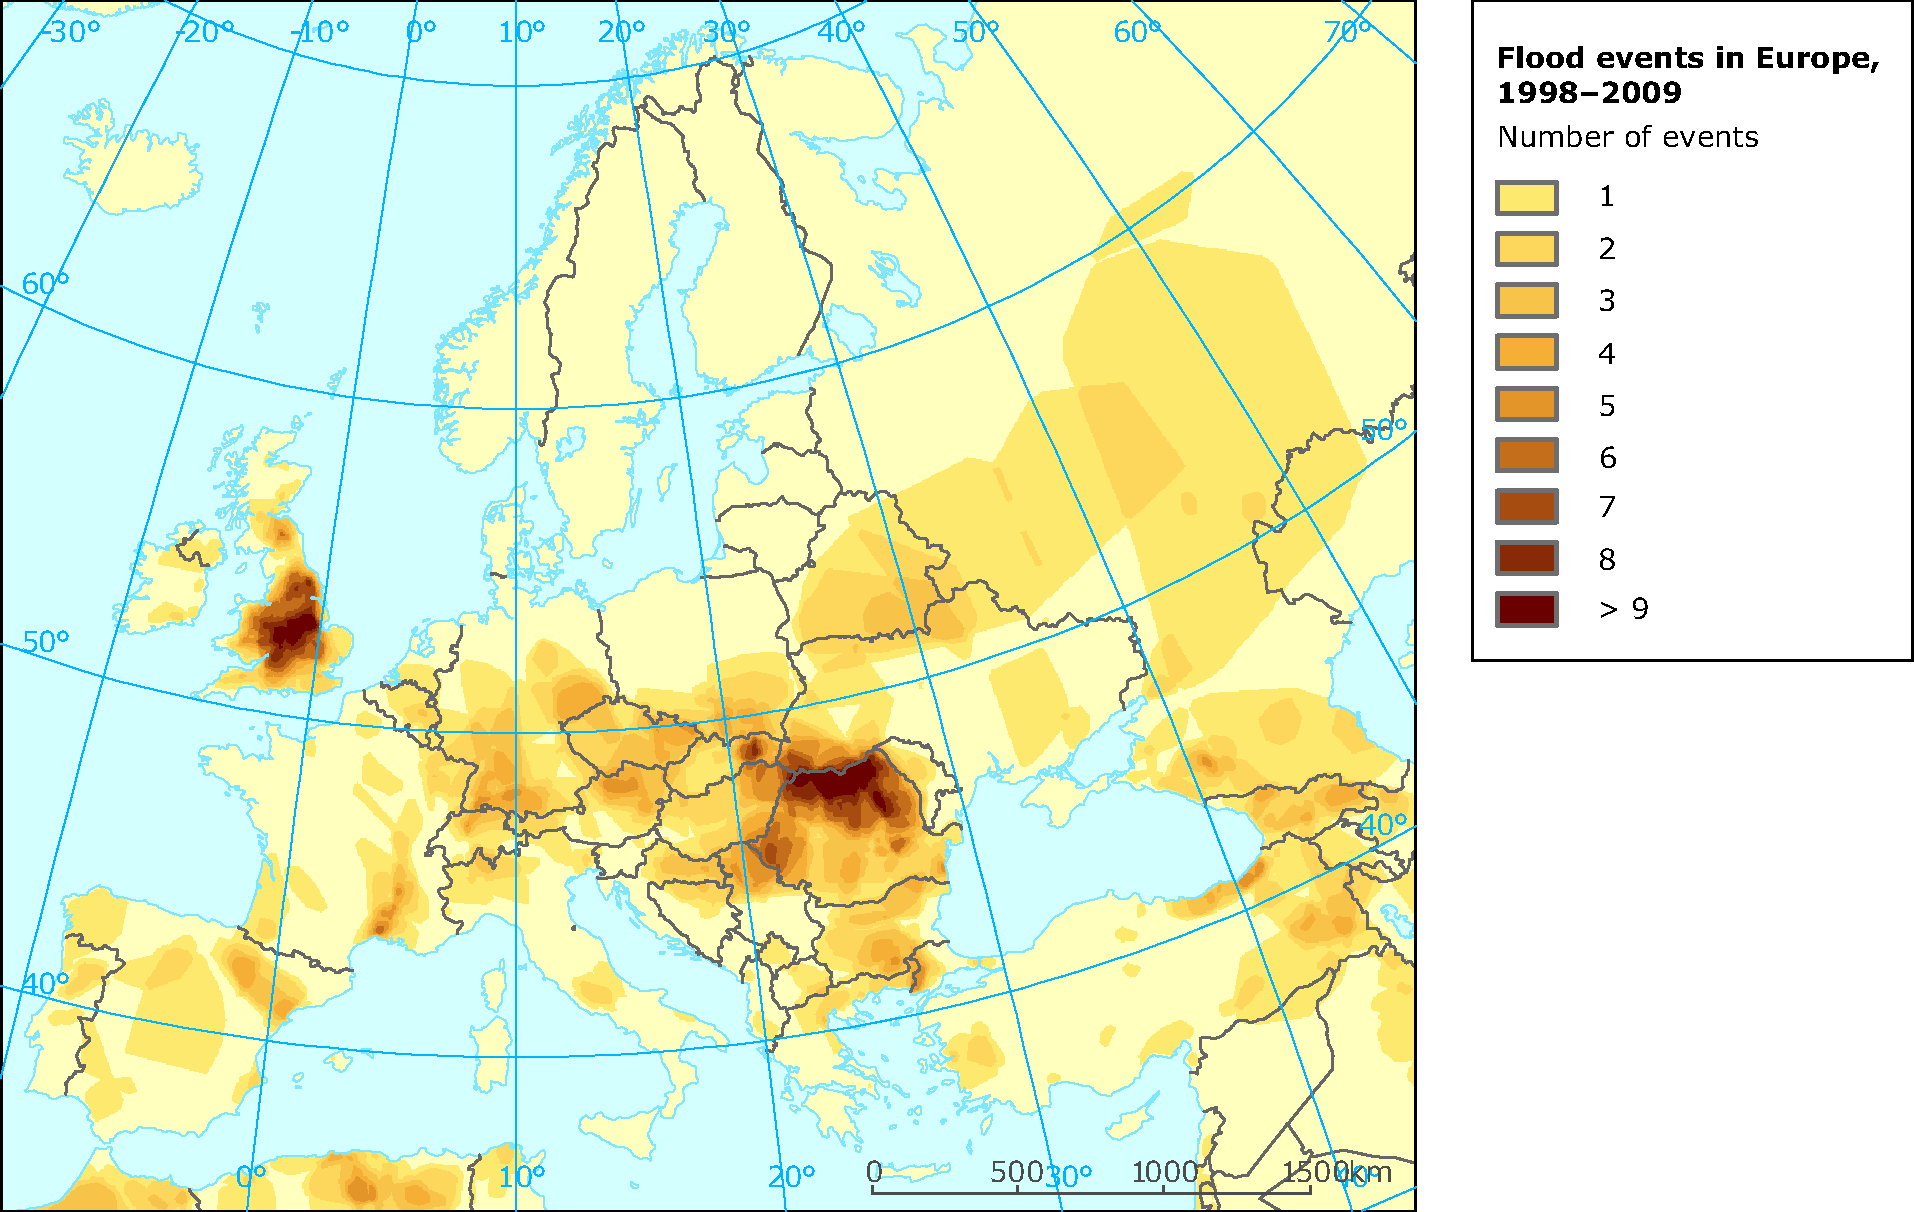 Occurrence of major floods in Europe